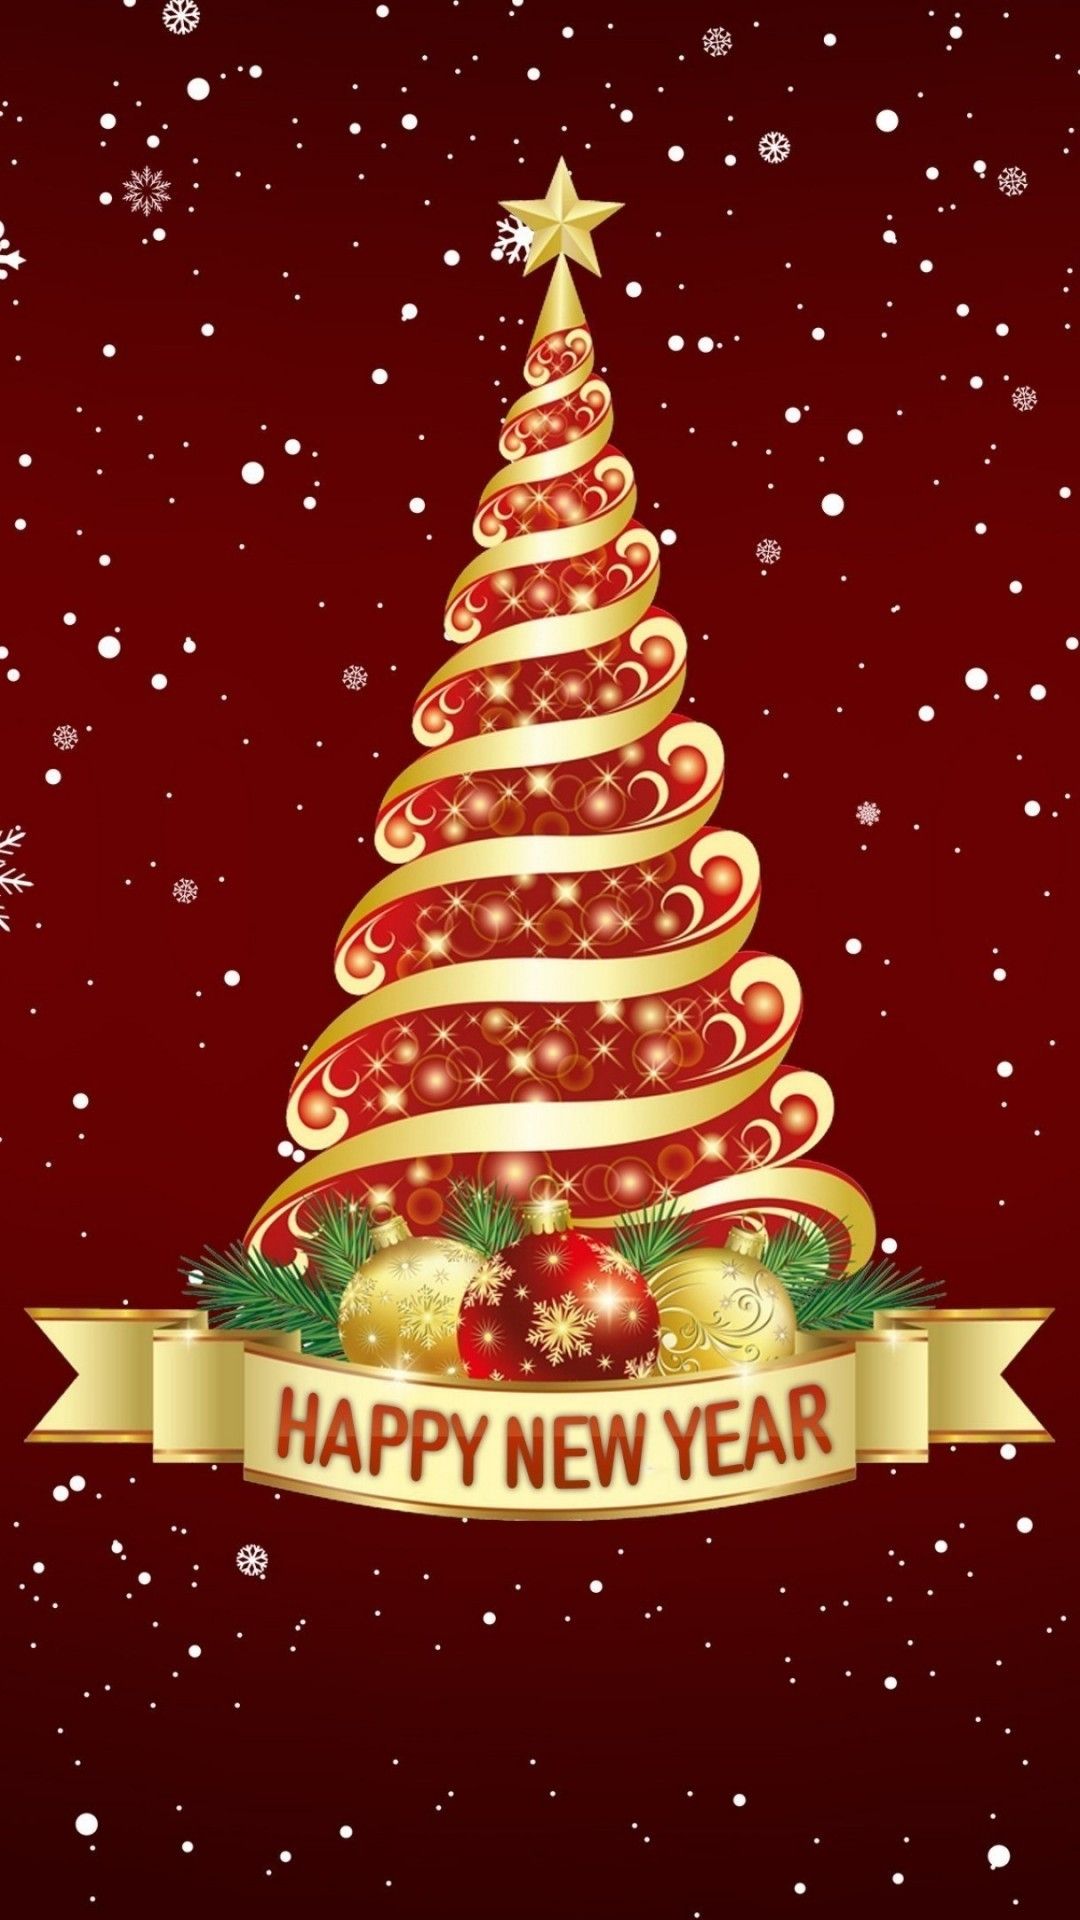 Download 1080x1920 Happy New Year Christmas Tree, Snowflakes, Design Wallpaper for iPhone iPhone 7 Plus, iPhone 6+, Sony Xperia Z, HTC One